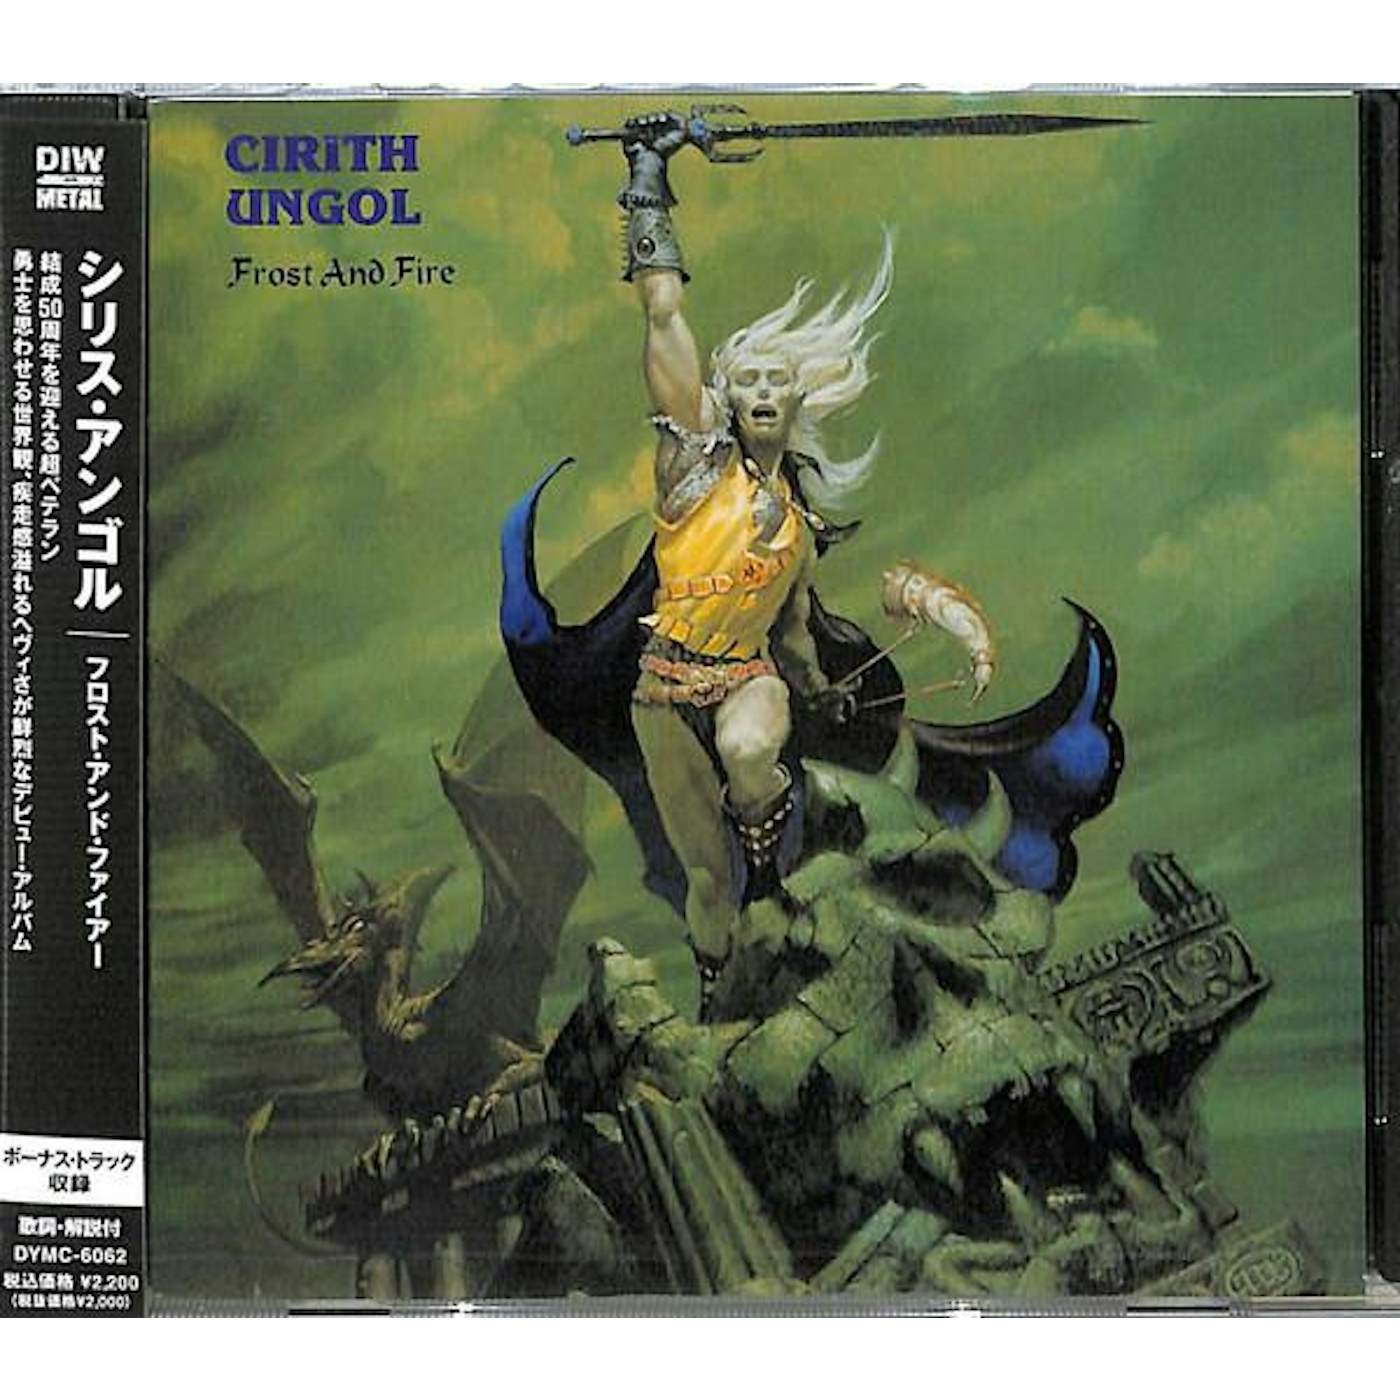 Cirith Ungol FROST & FIRE FROST & FIRE CD